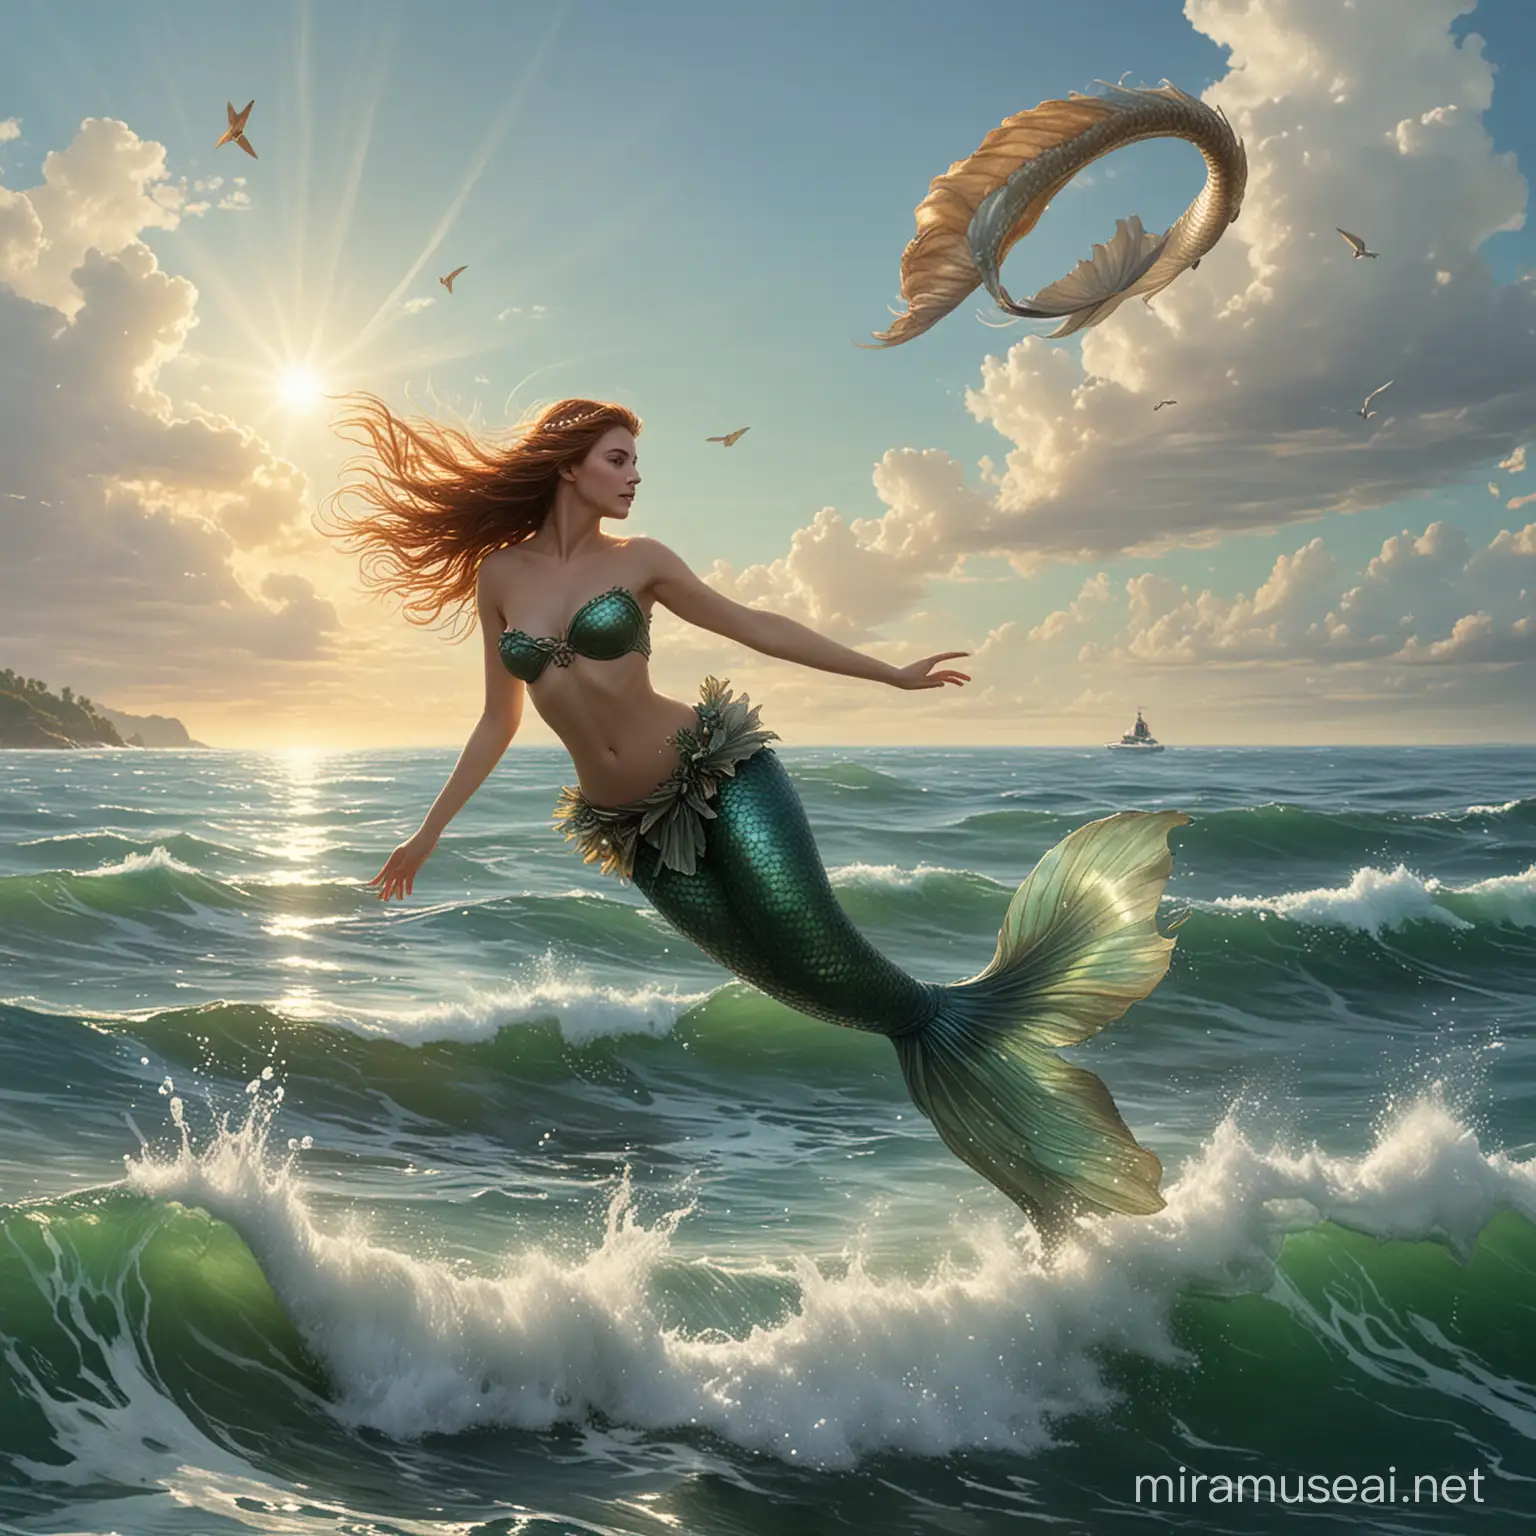 air nymph flying through the air over the sea, in the sea a mermaid waving to a passing nymph